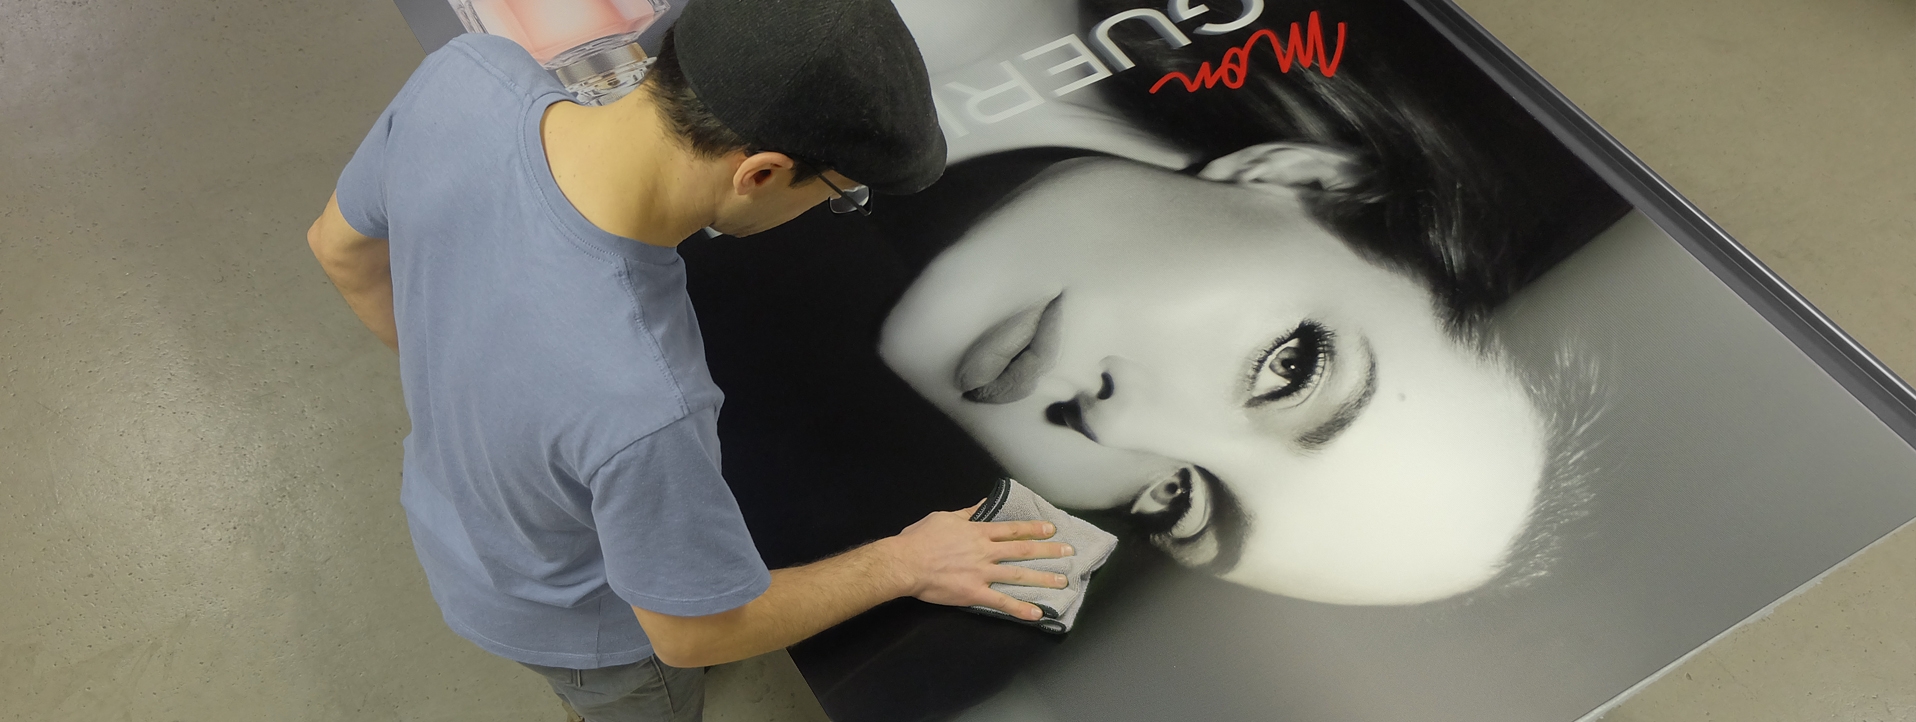   // PARALLAX PRINTING // World Class Lenticular Printing    GET STARTED  